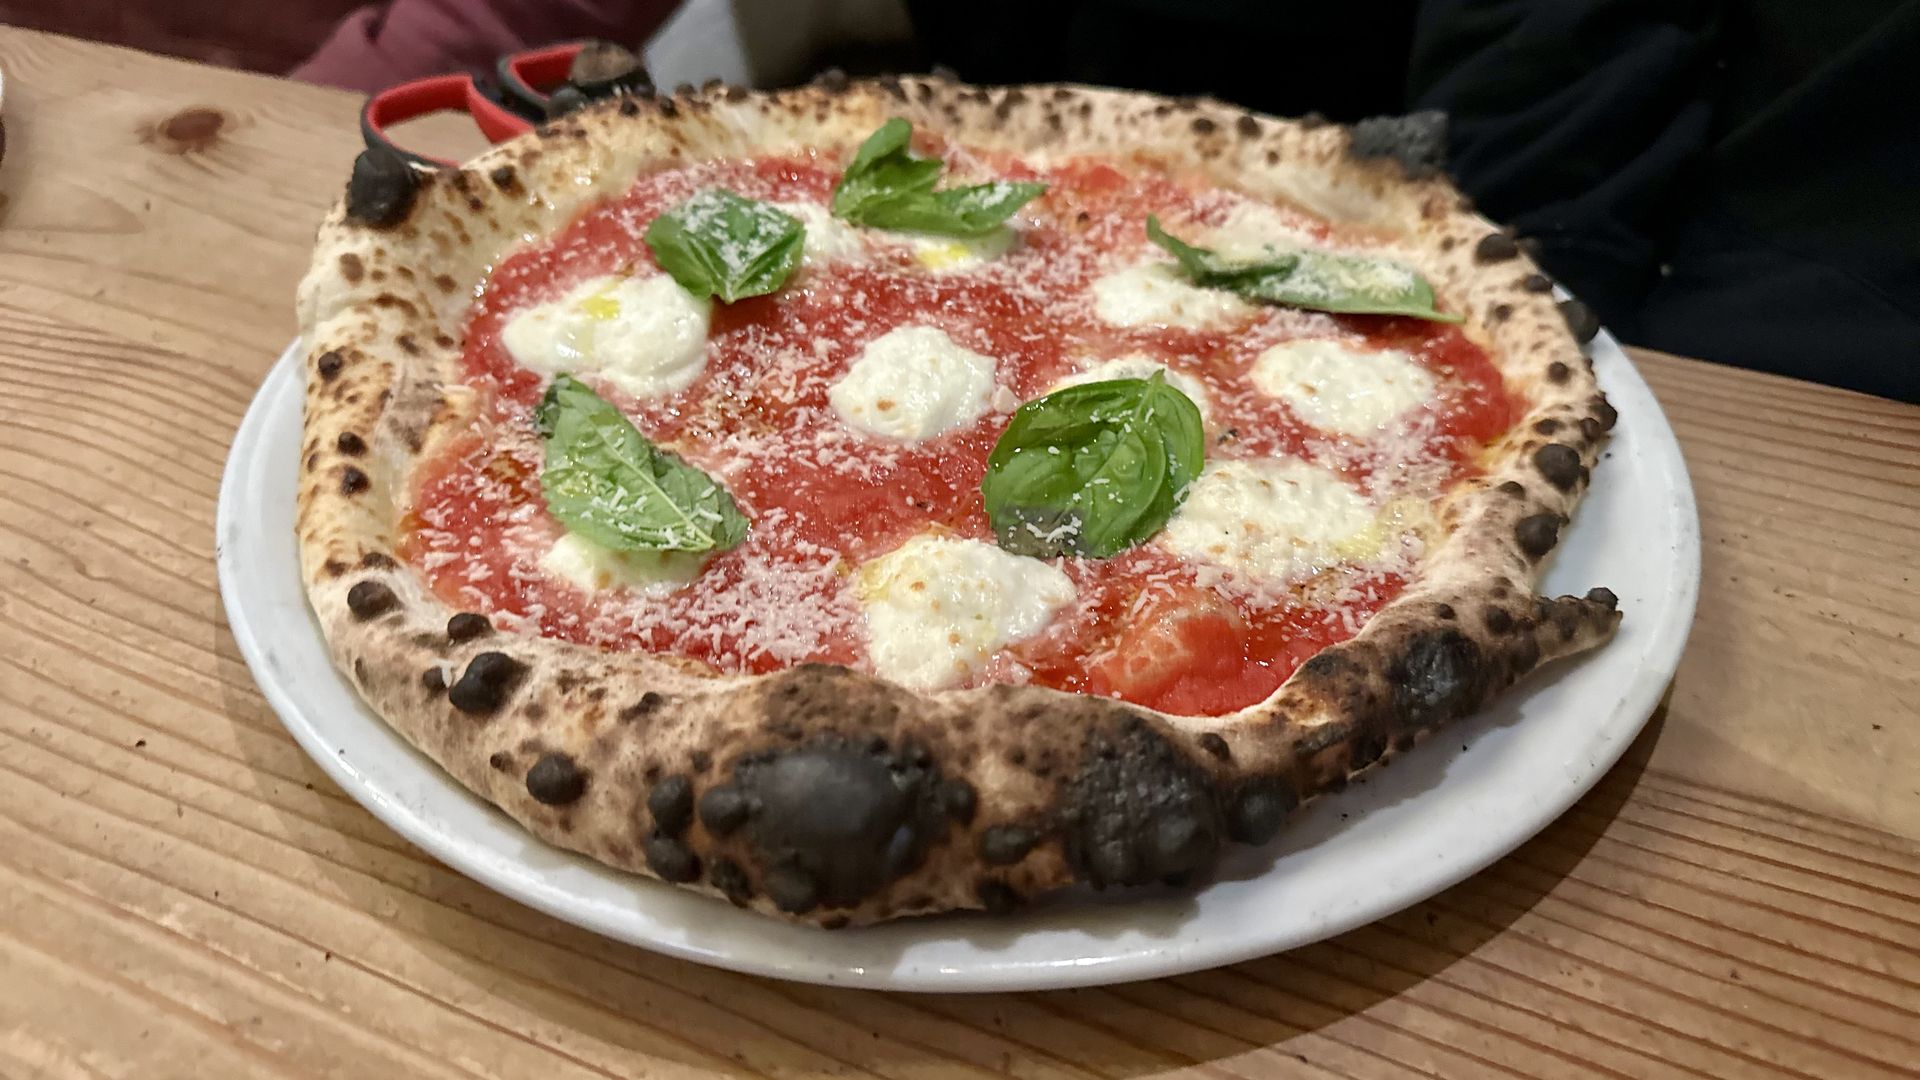 A pizza with puffed and blistered crust and dobs of buffalo mozzerella and whole basil leaves on a red sauce, sitting on a white plate on a wood table.